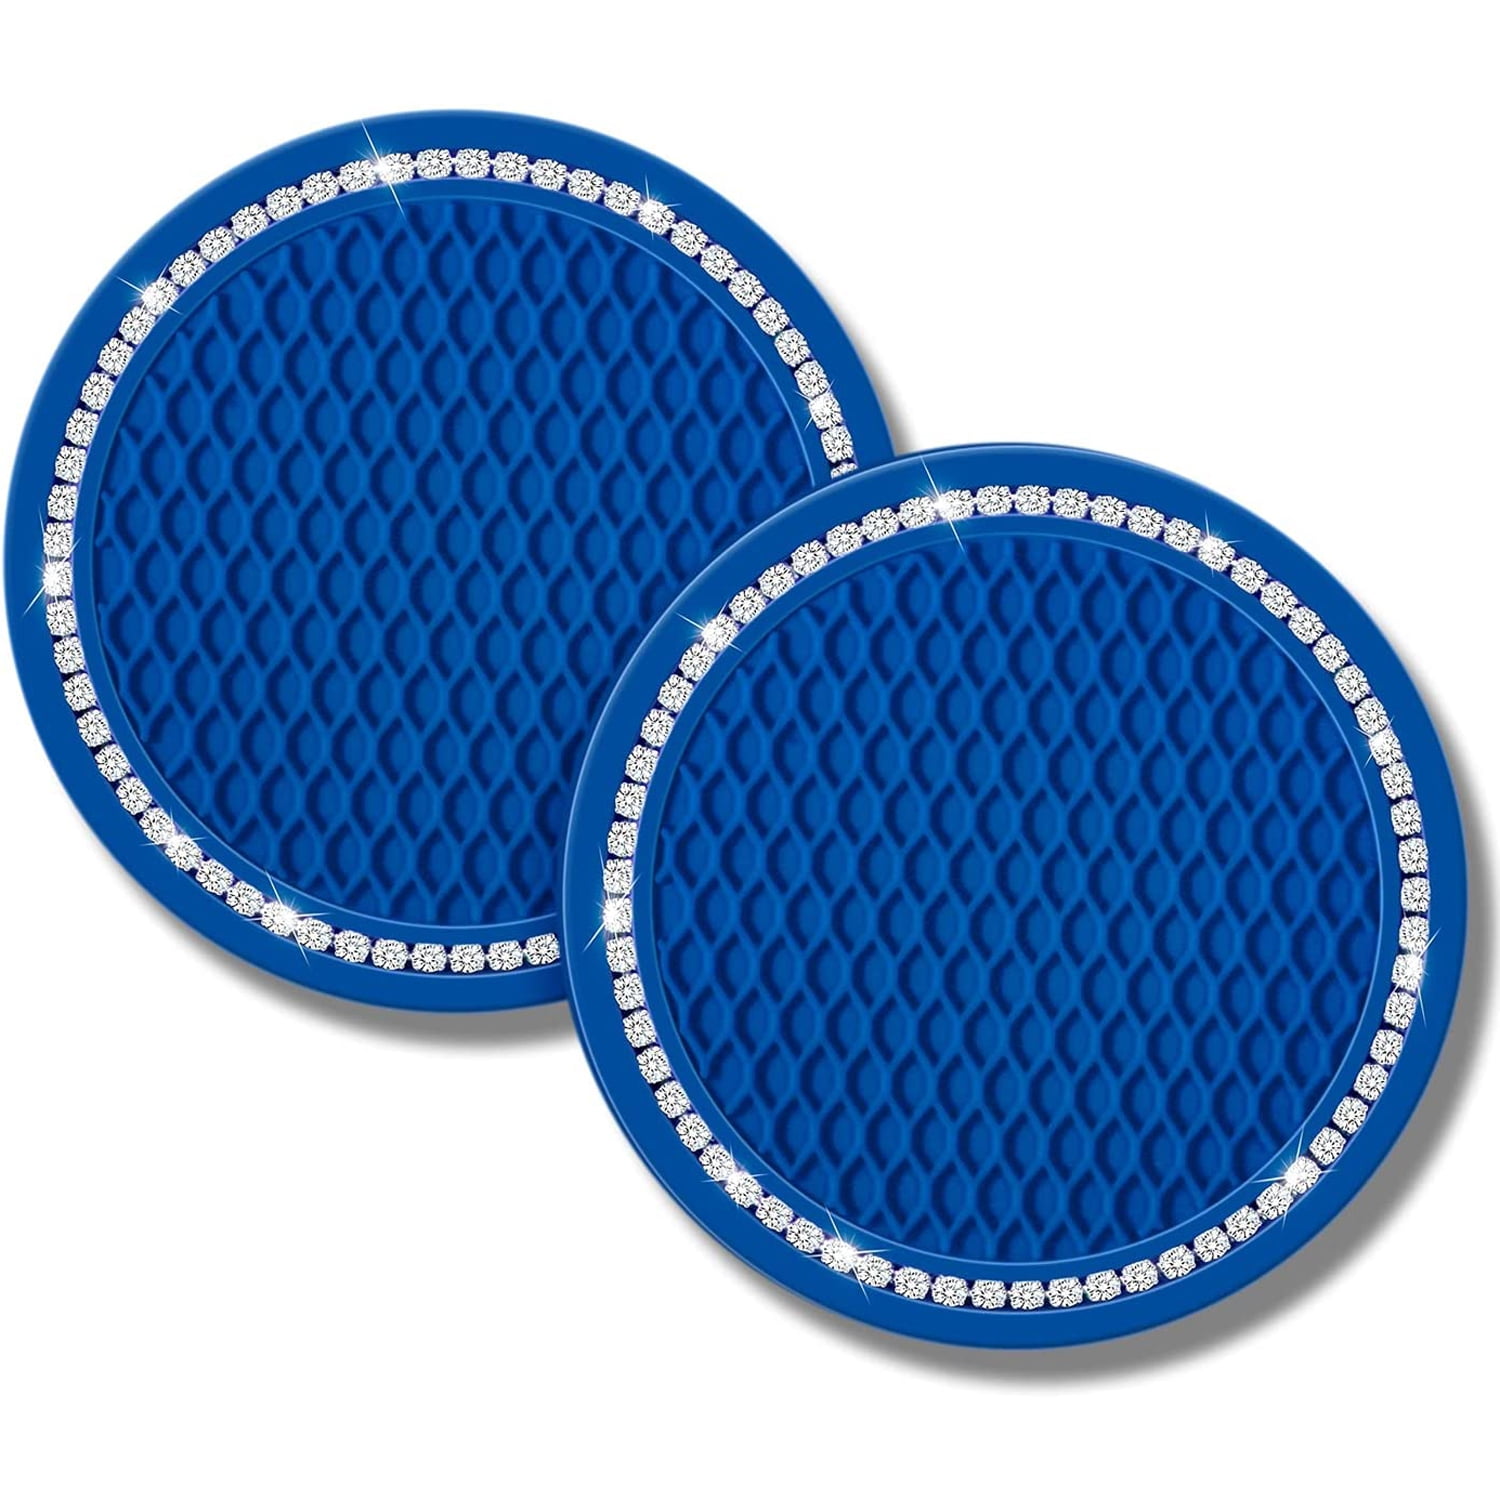 Accessories, Colorful Bling Rhinestone Car Coasters For Cup Holder 2 Pack